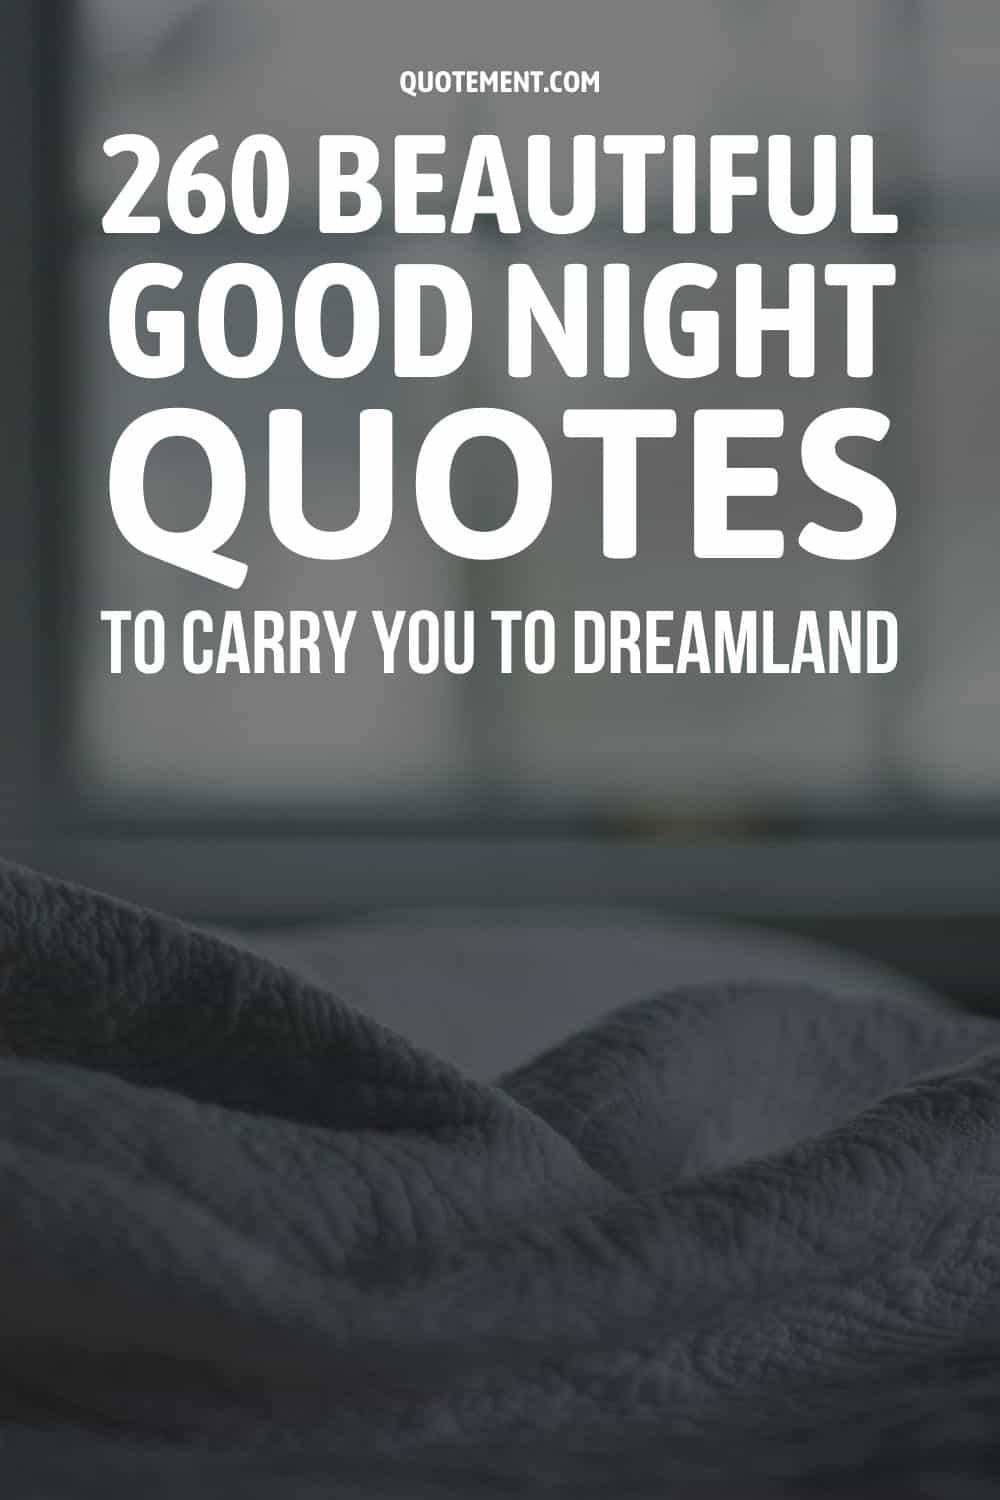 260 Beautiful Good Night Quotes To Carry You To Dreamland